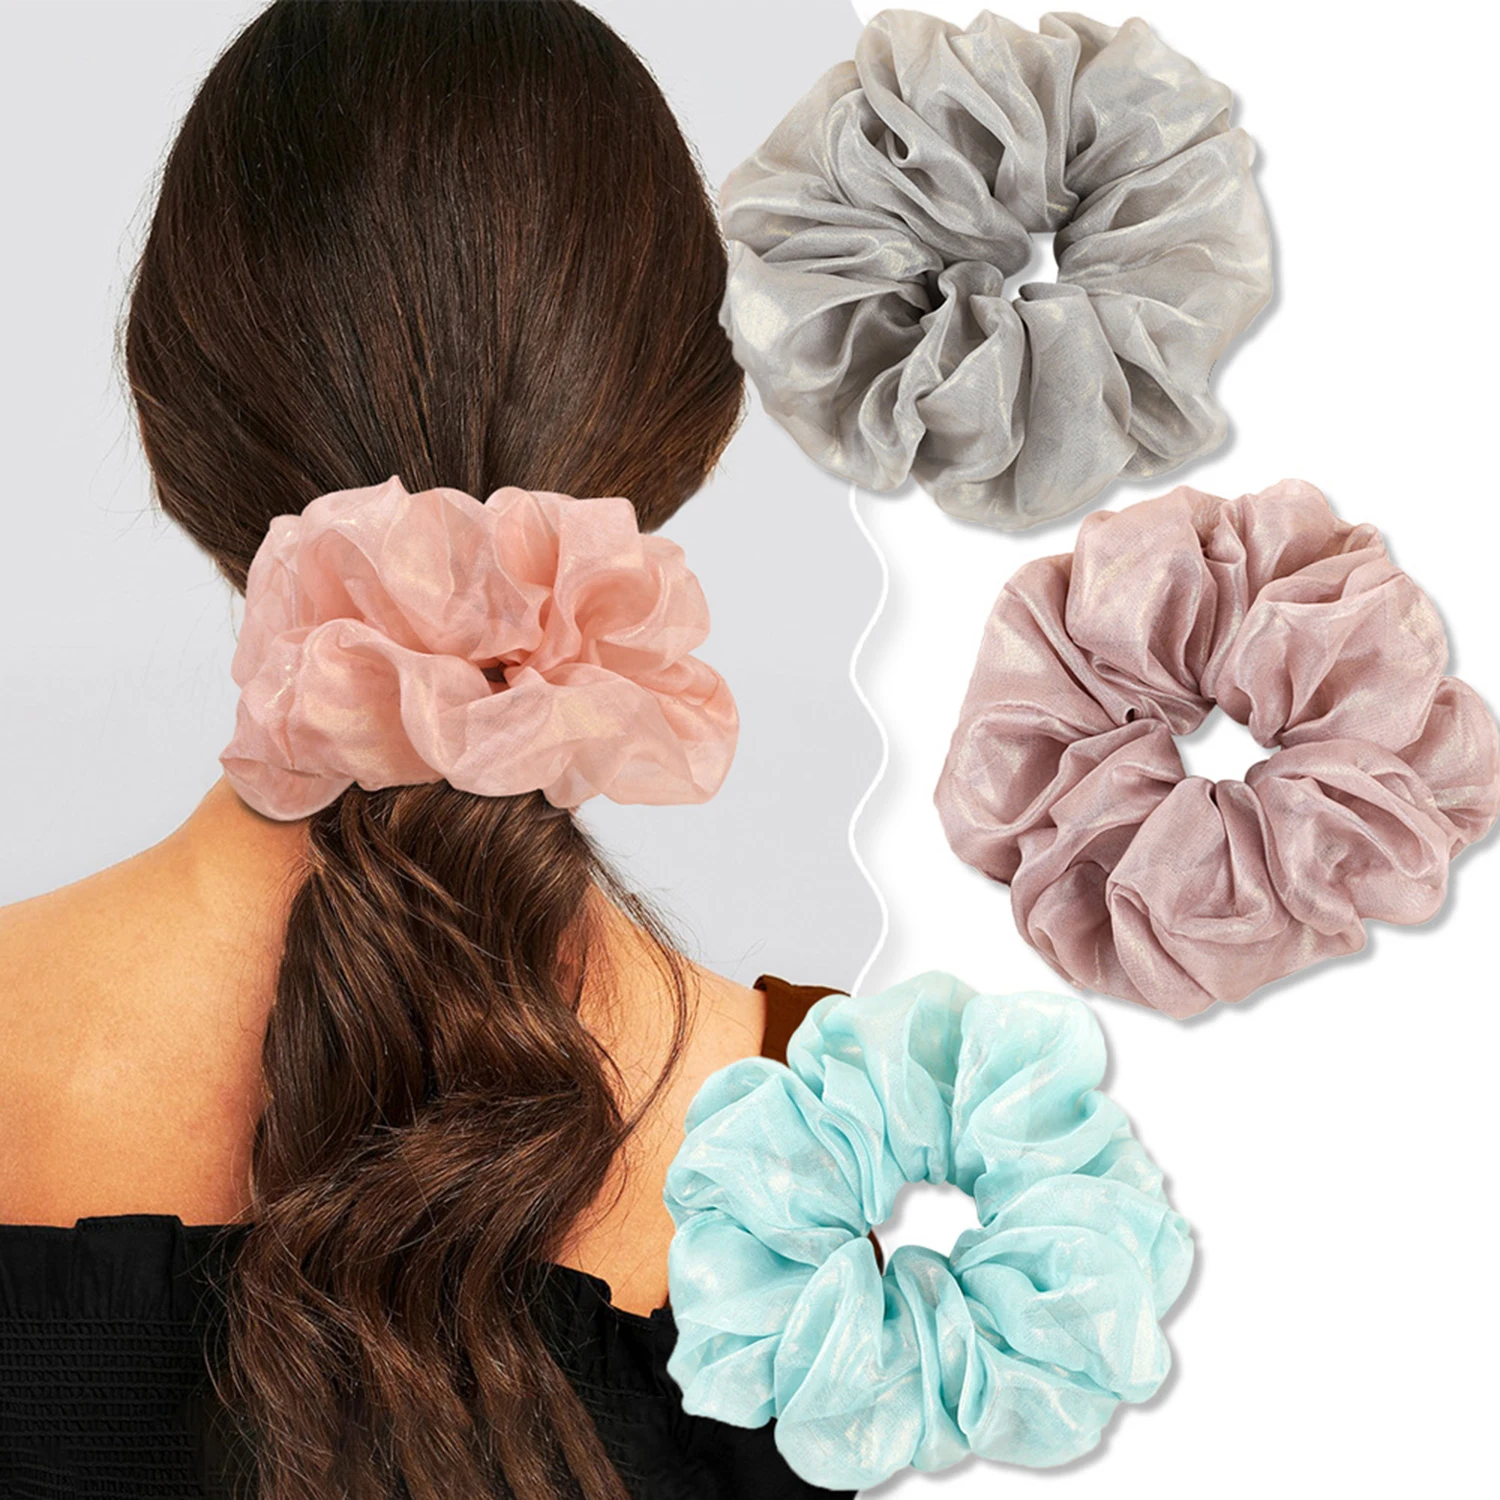 

Fashion Oversized Scrunchies Hair Ties Elastic Hair Band Women Ponytail Holder Hair Ropes Girls Extra Large Hair Ornaments